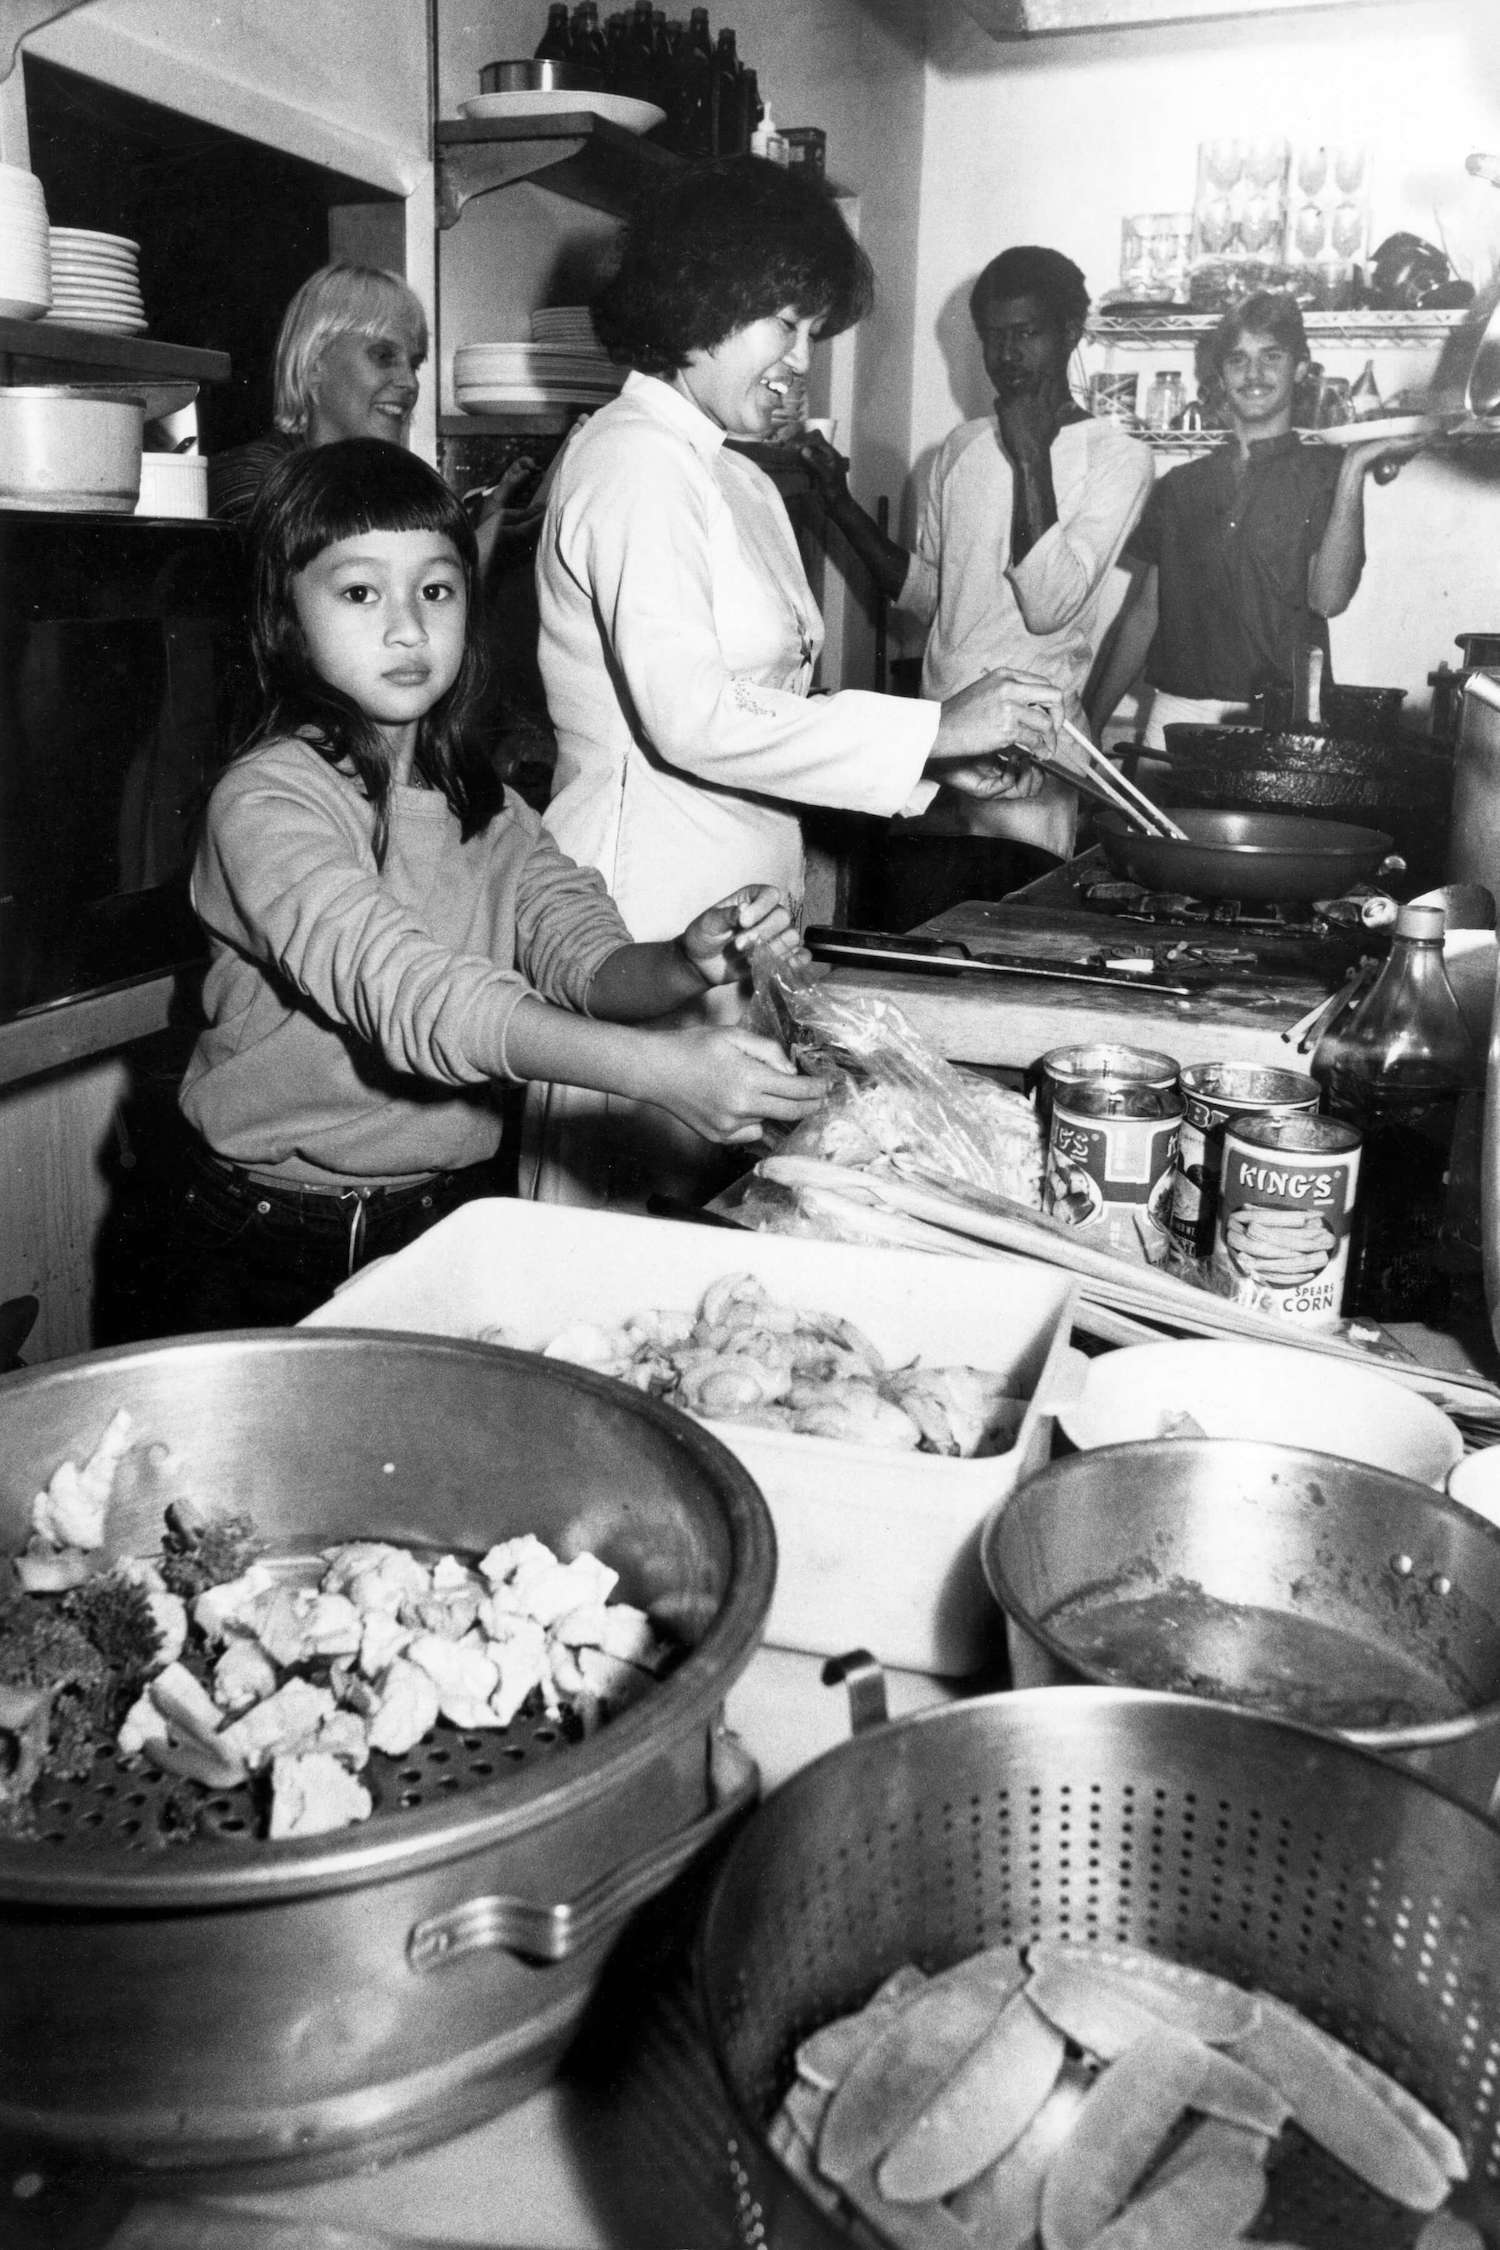 Phuong Lien (now Lyn), Kathy Manning, and Tung Nguyen cooking at Hy Vong, 1982. June 2021